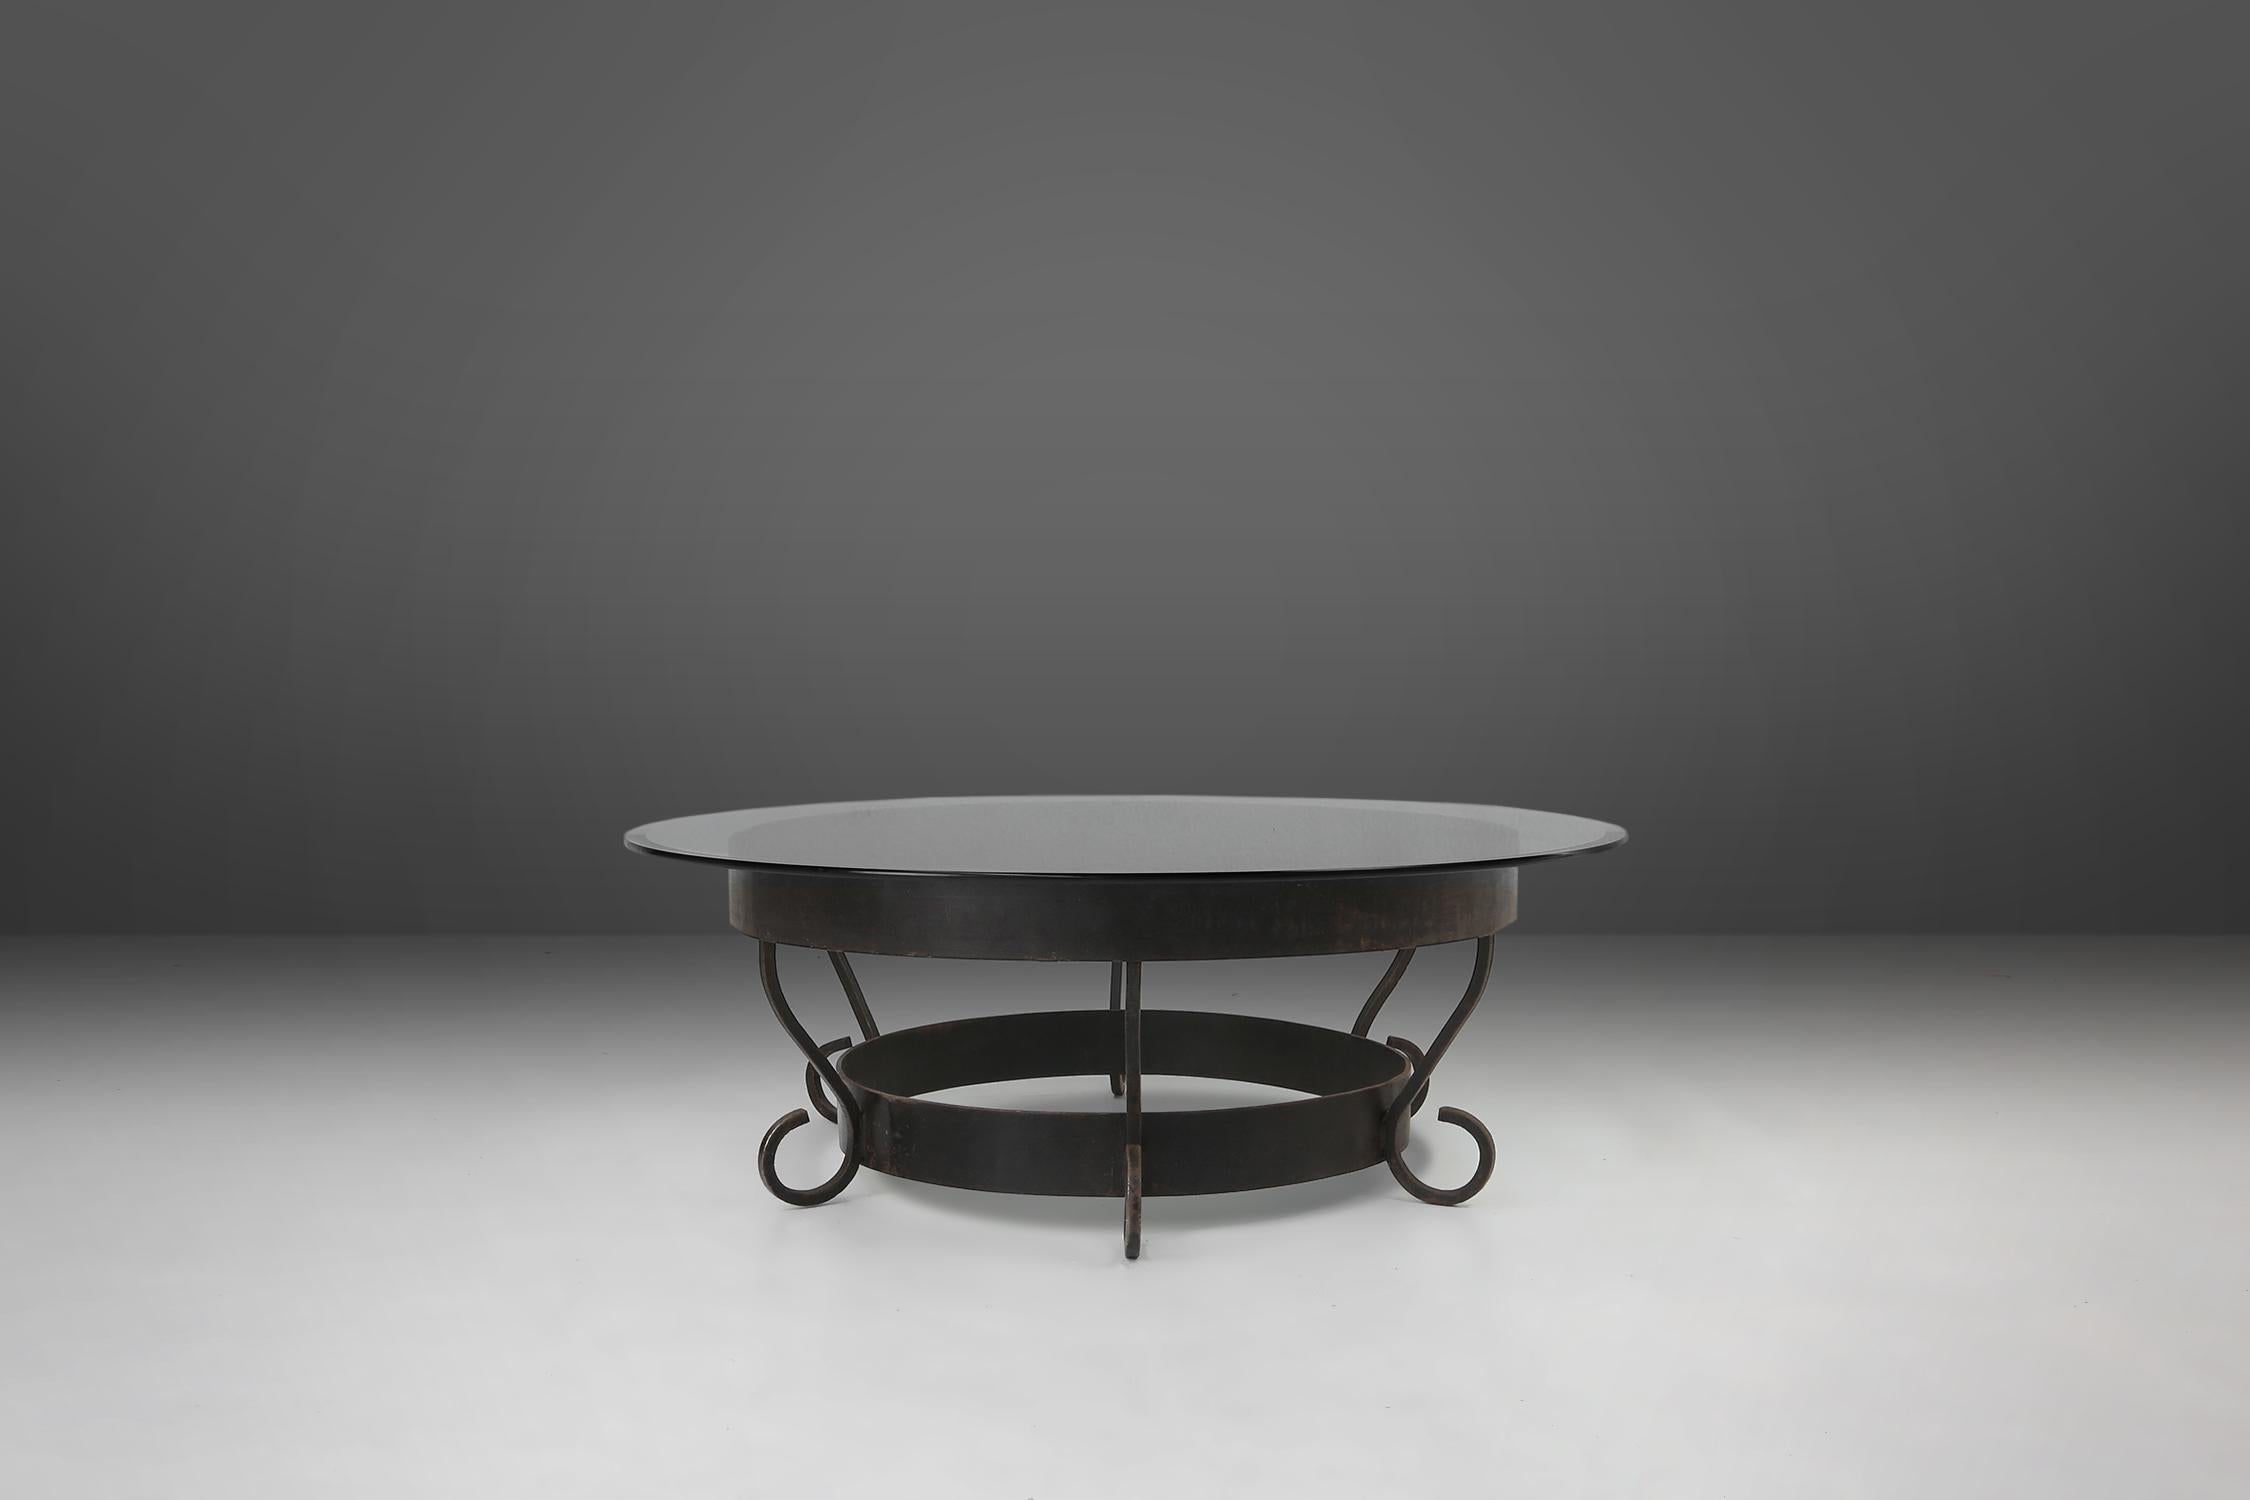 France / 1930s / wrought iron and glass / rustic / mid-century / industrial

Large rustic round French coffee table with wrought iron base and a round glass top with nice patina. The intricate metal base has delicate curves and elegant detailing